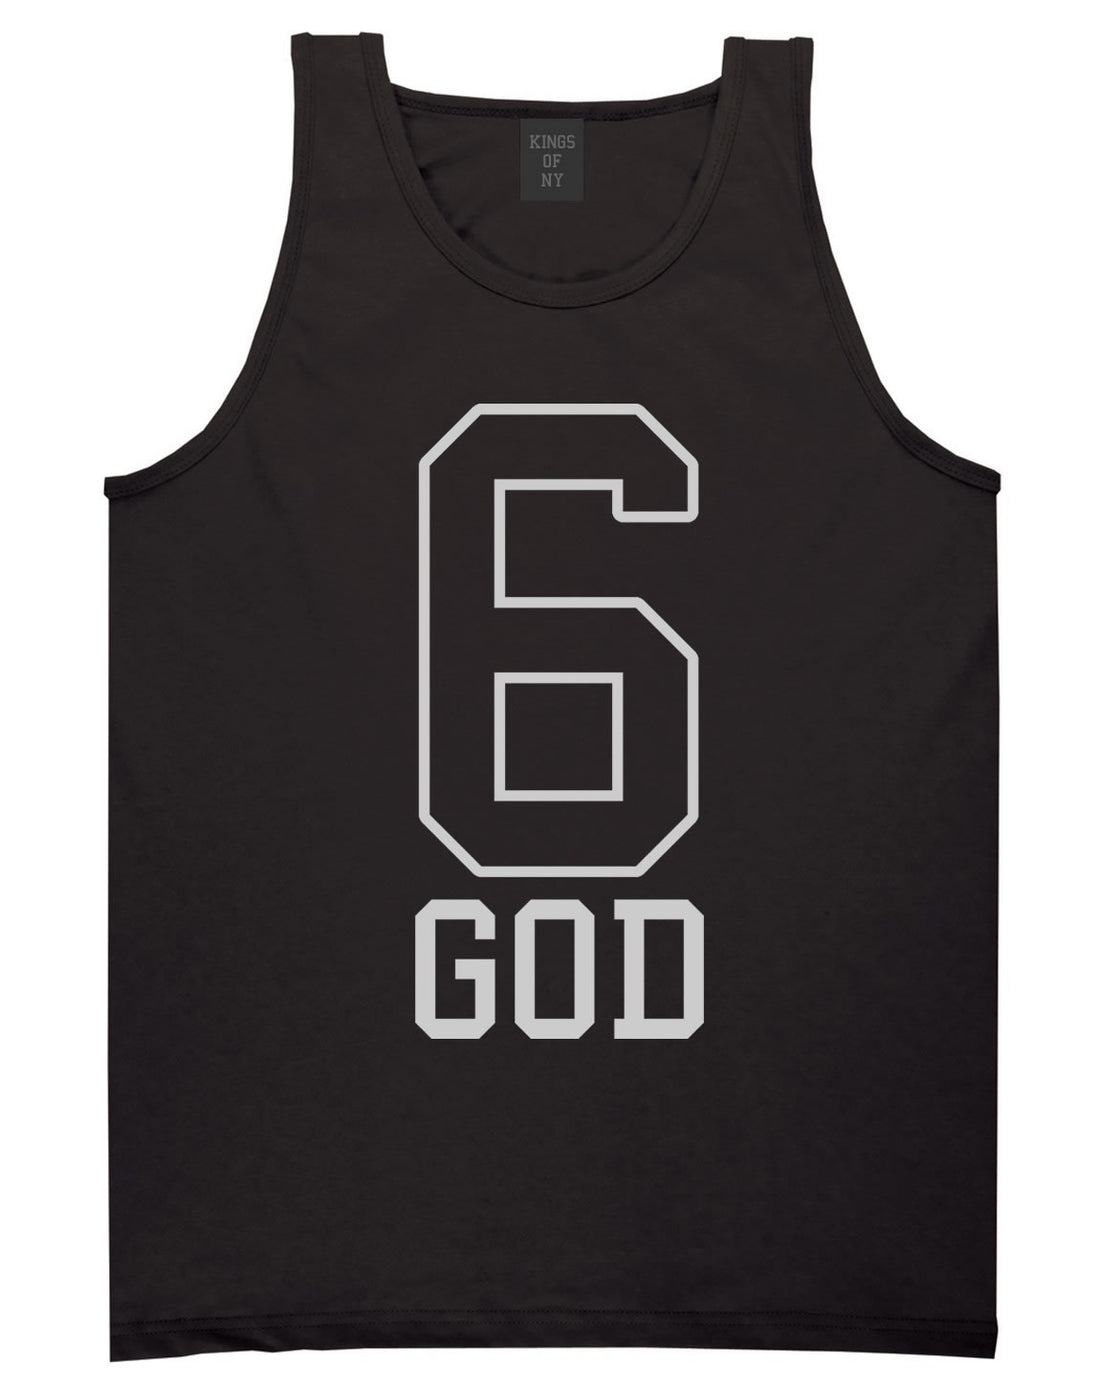 Six 6 God Tank Top in Black By Kings Of NY